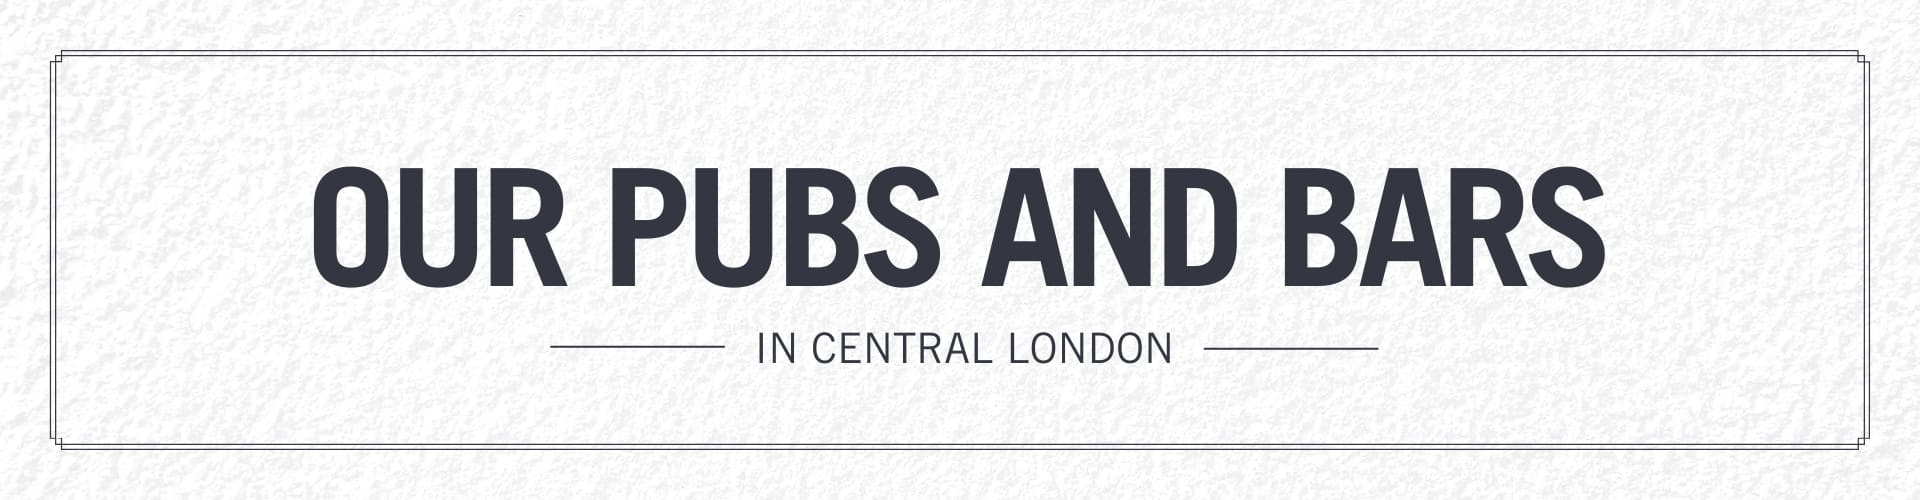 Pubs and bars in Central London